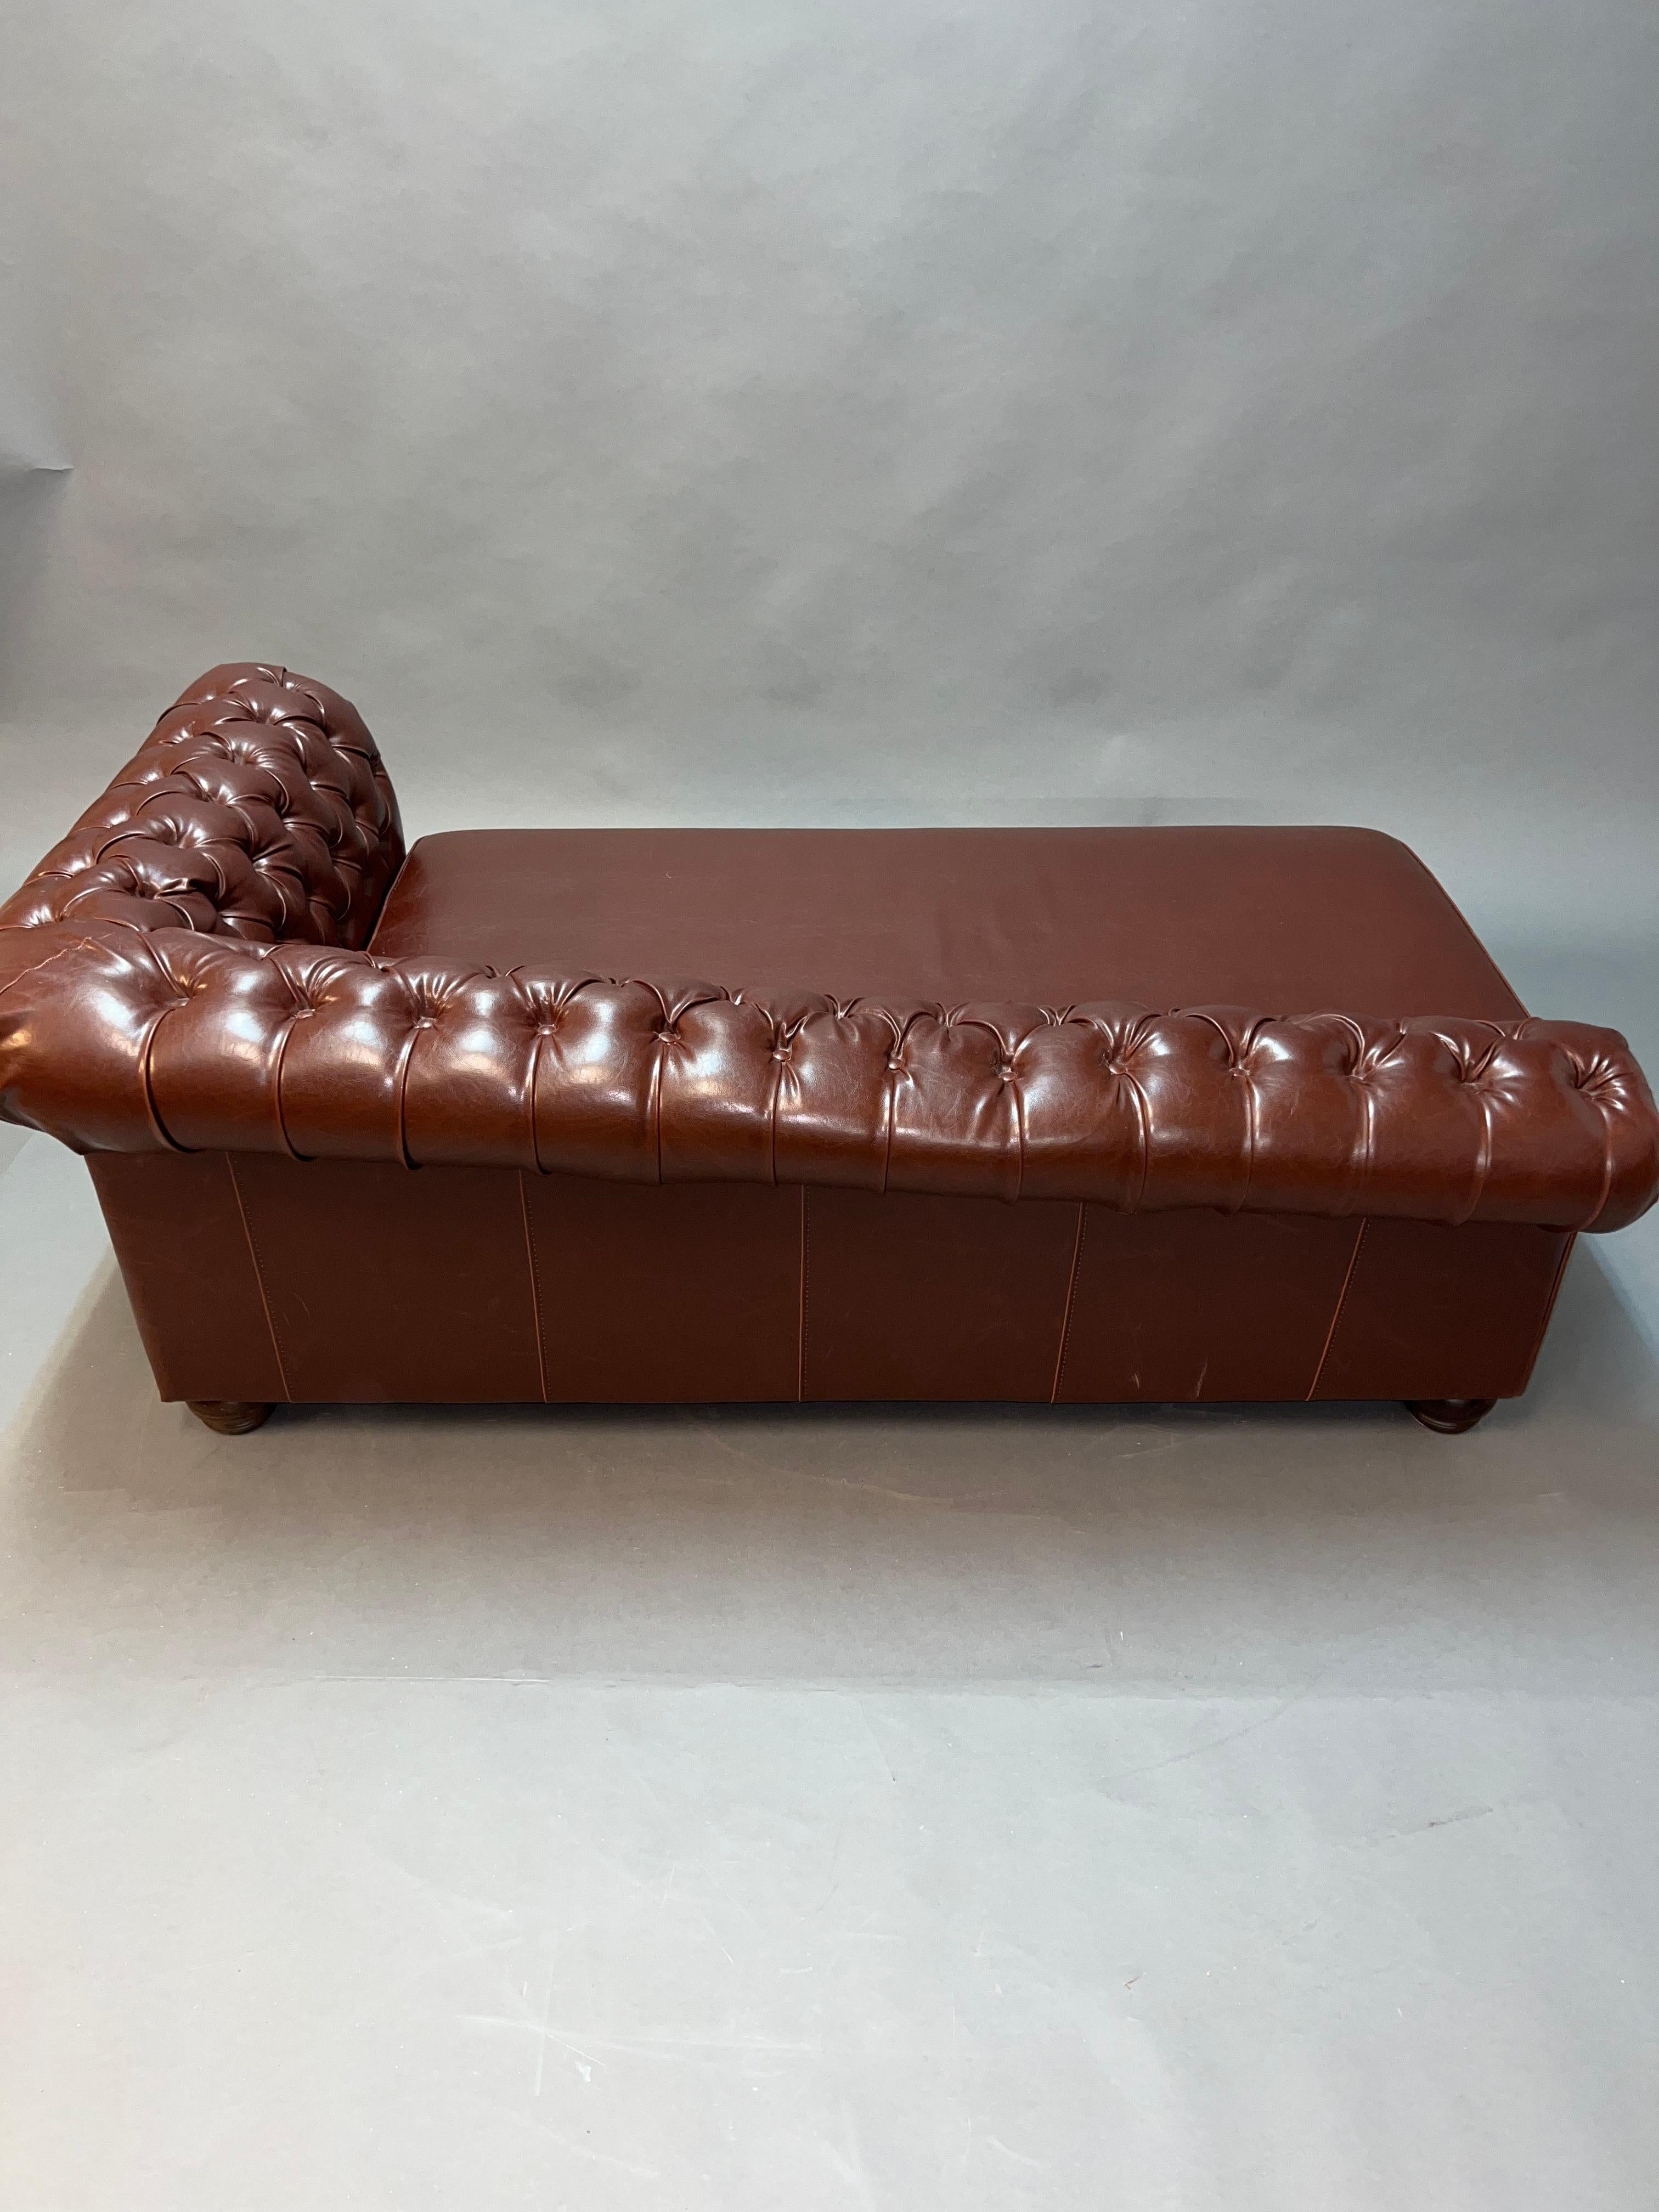 Lovely Vintage Chesterfield Brown Leder Look Chaise Lounge Daybed Sofa im Angebot 3